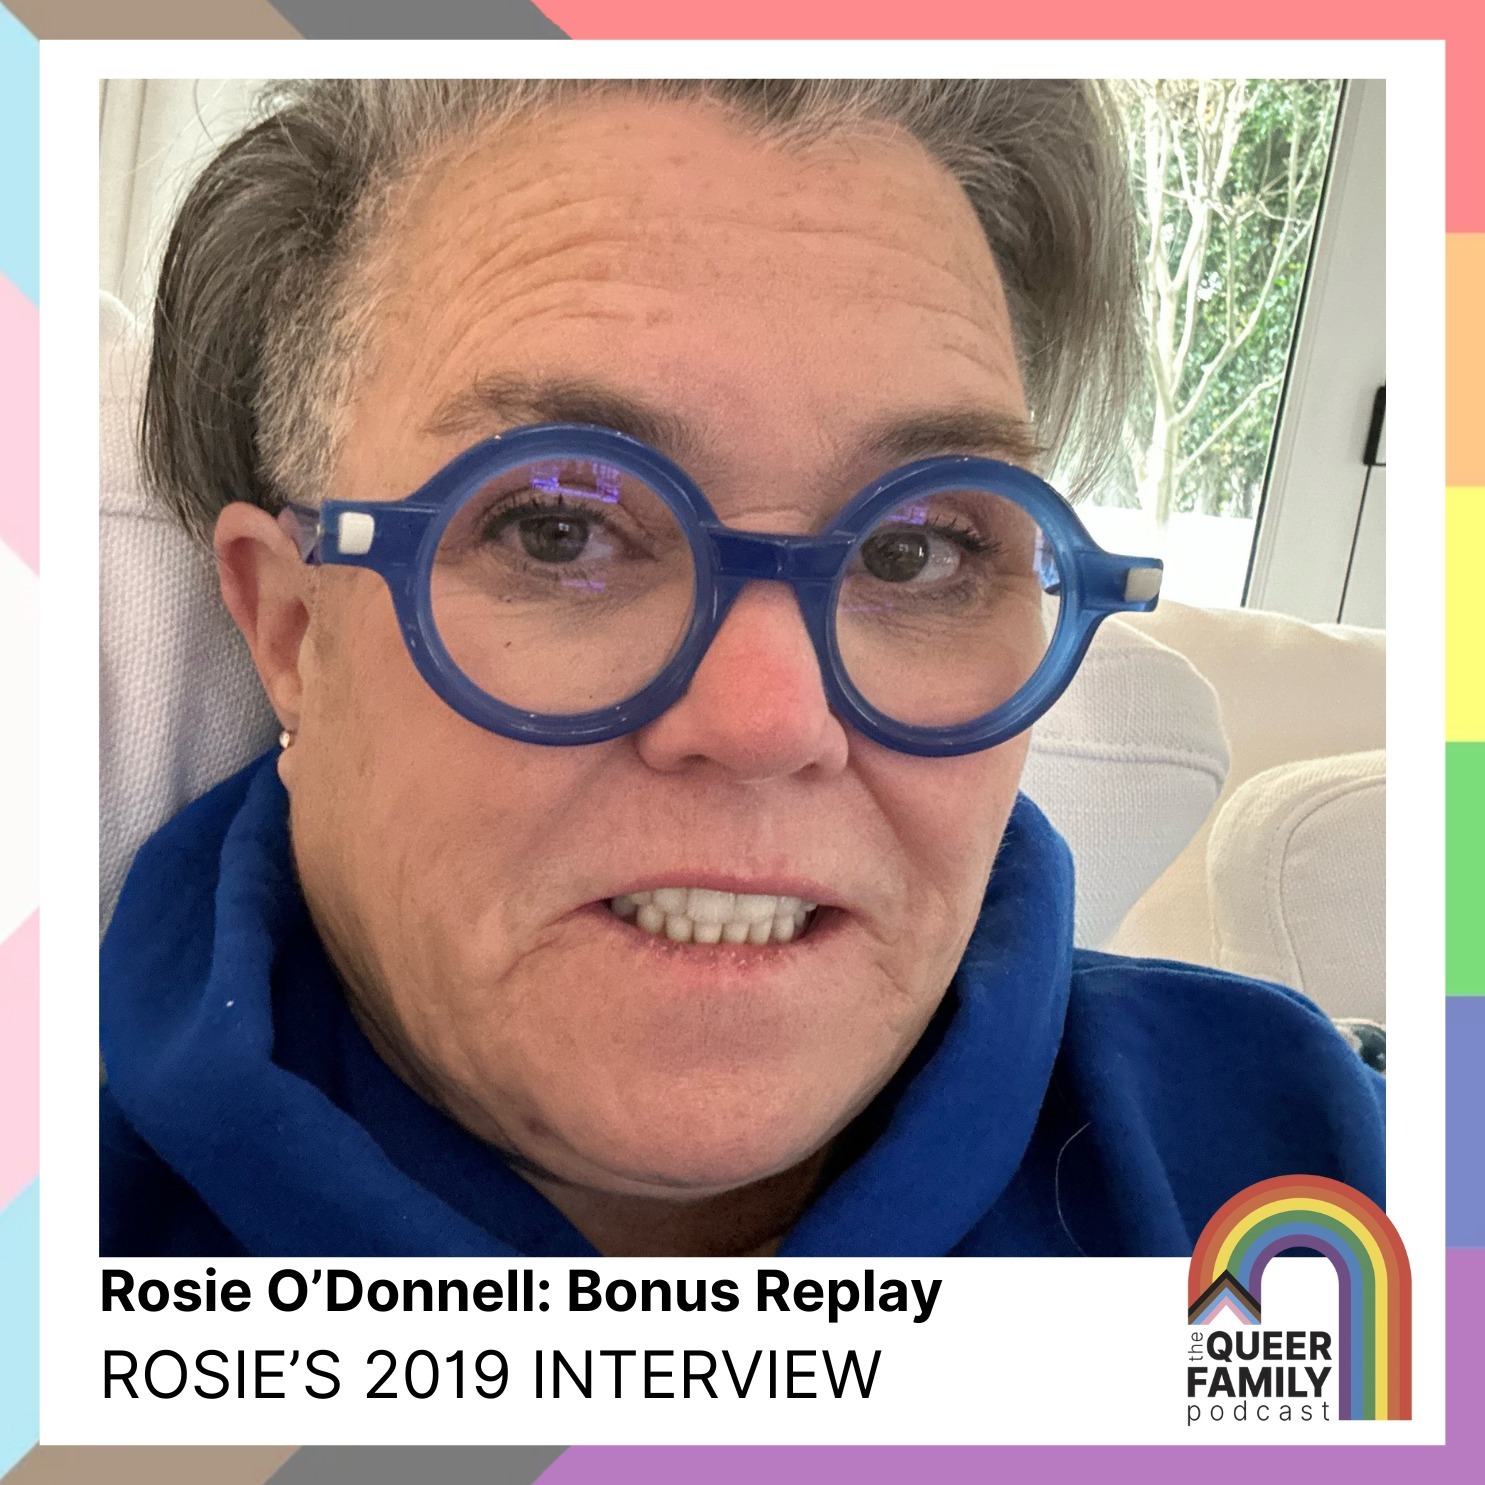 Bonus Replay: Rosie O'Donnell's 2019 Interview